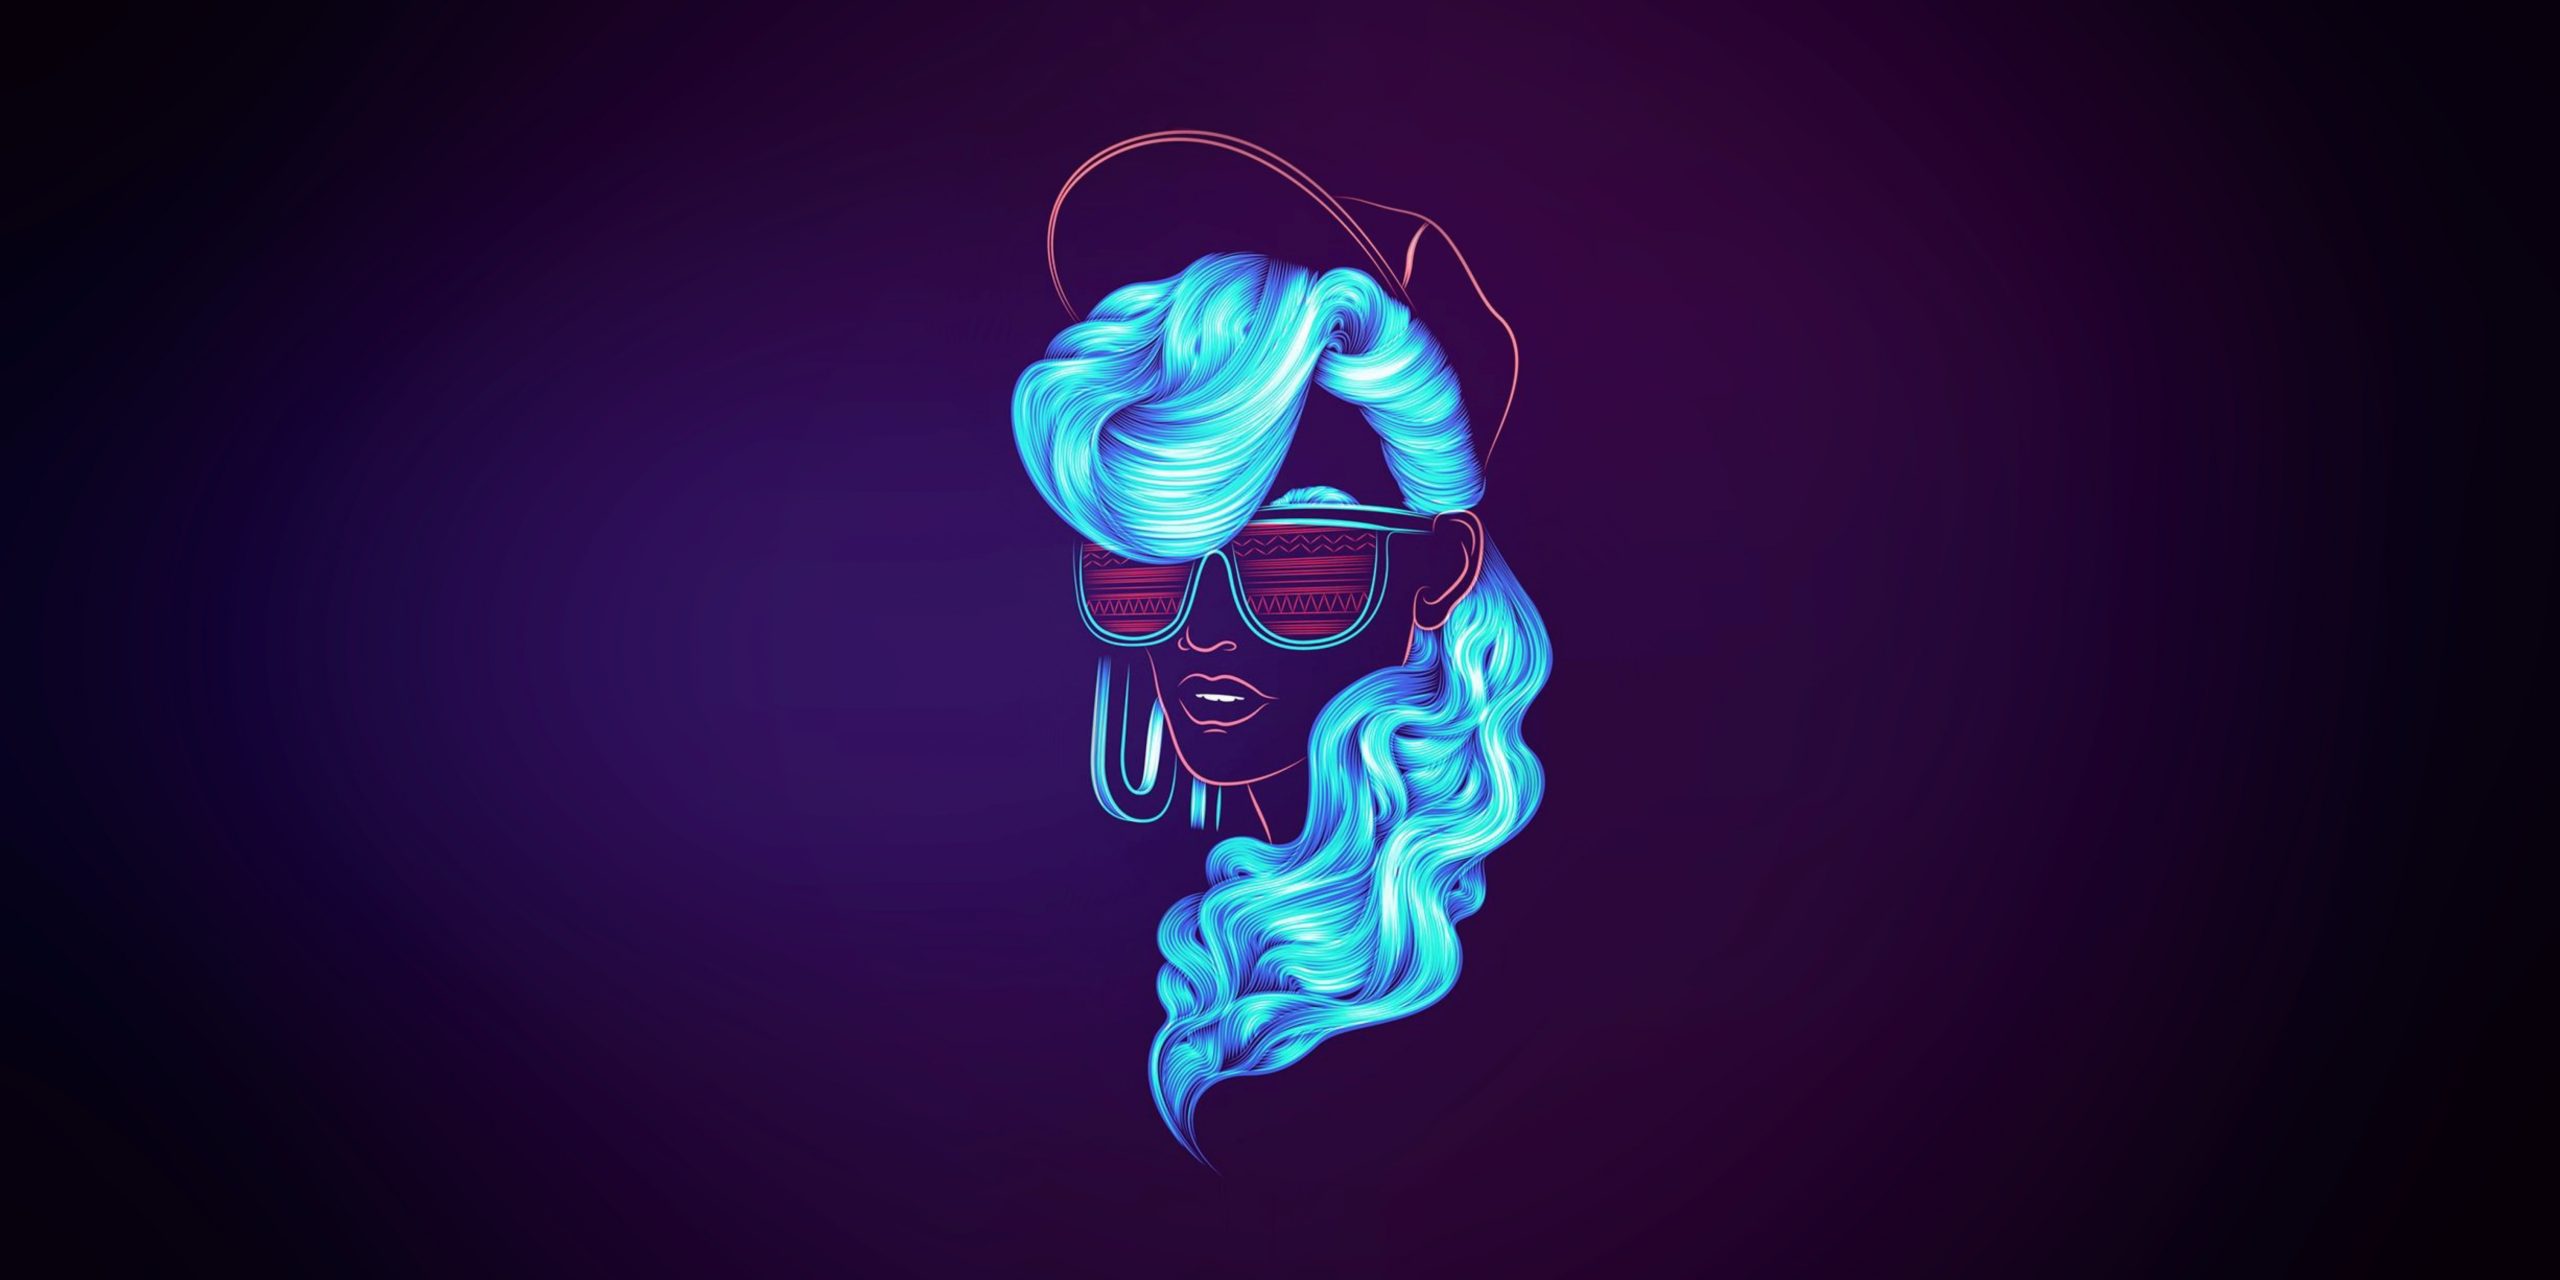 Girl, Music, Neon, Face, Background, 80s wallpaper, 80's, Synth, Retrowave